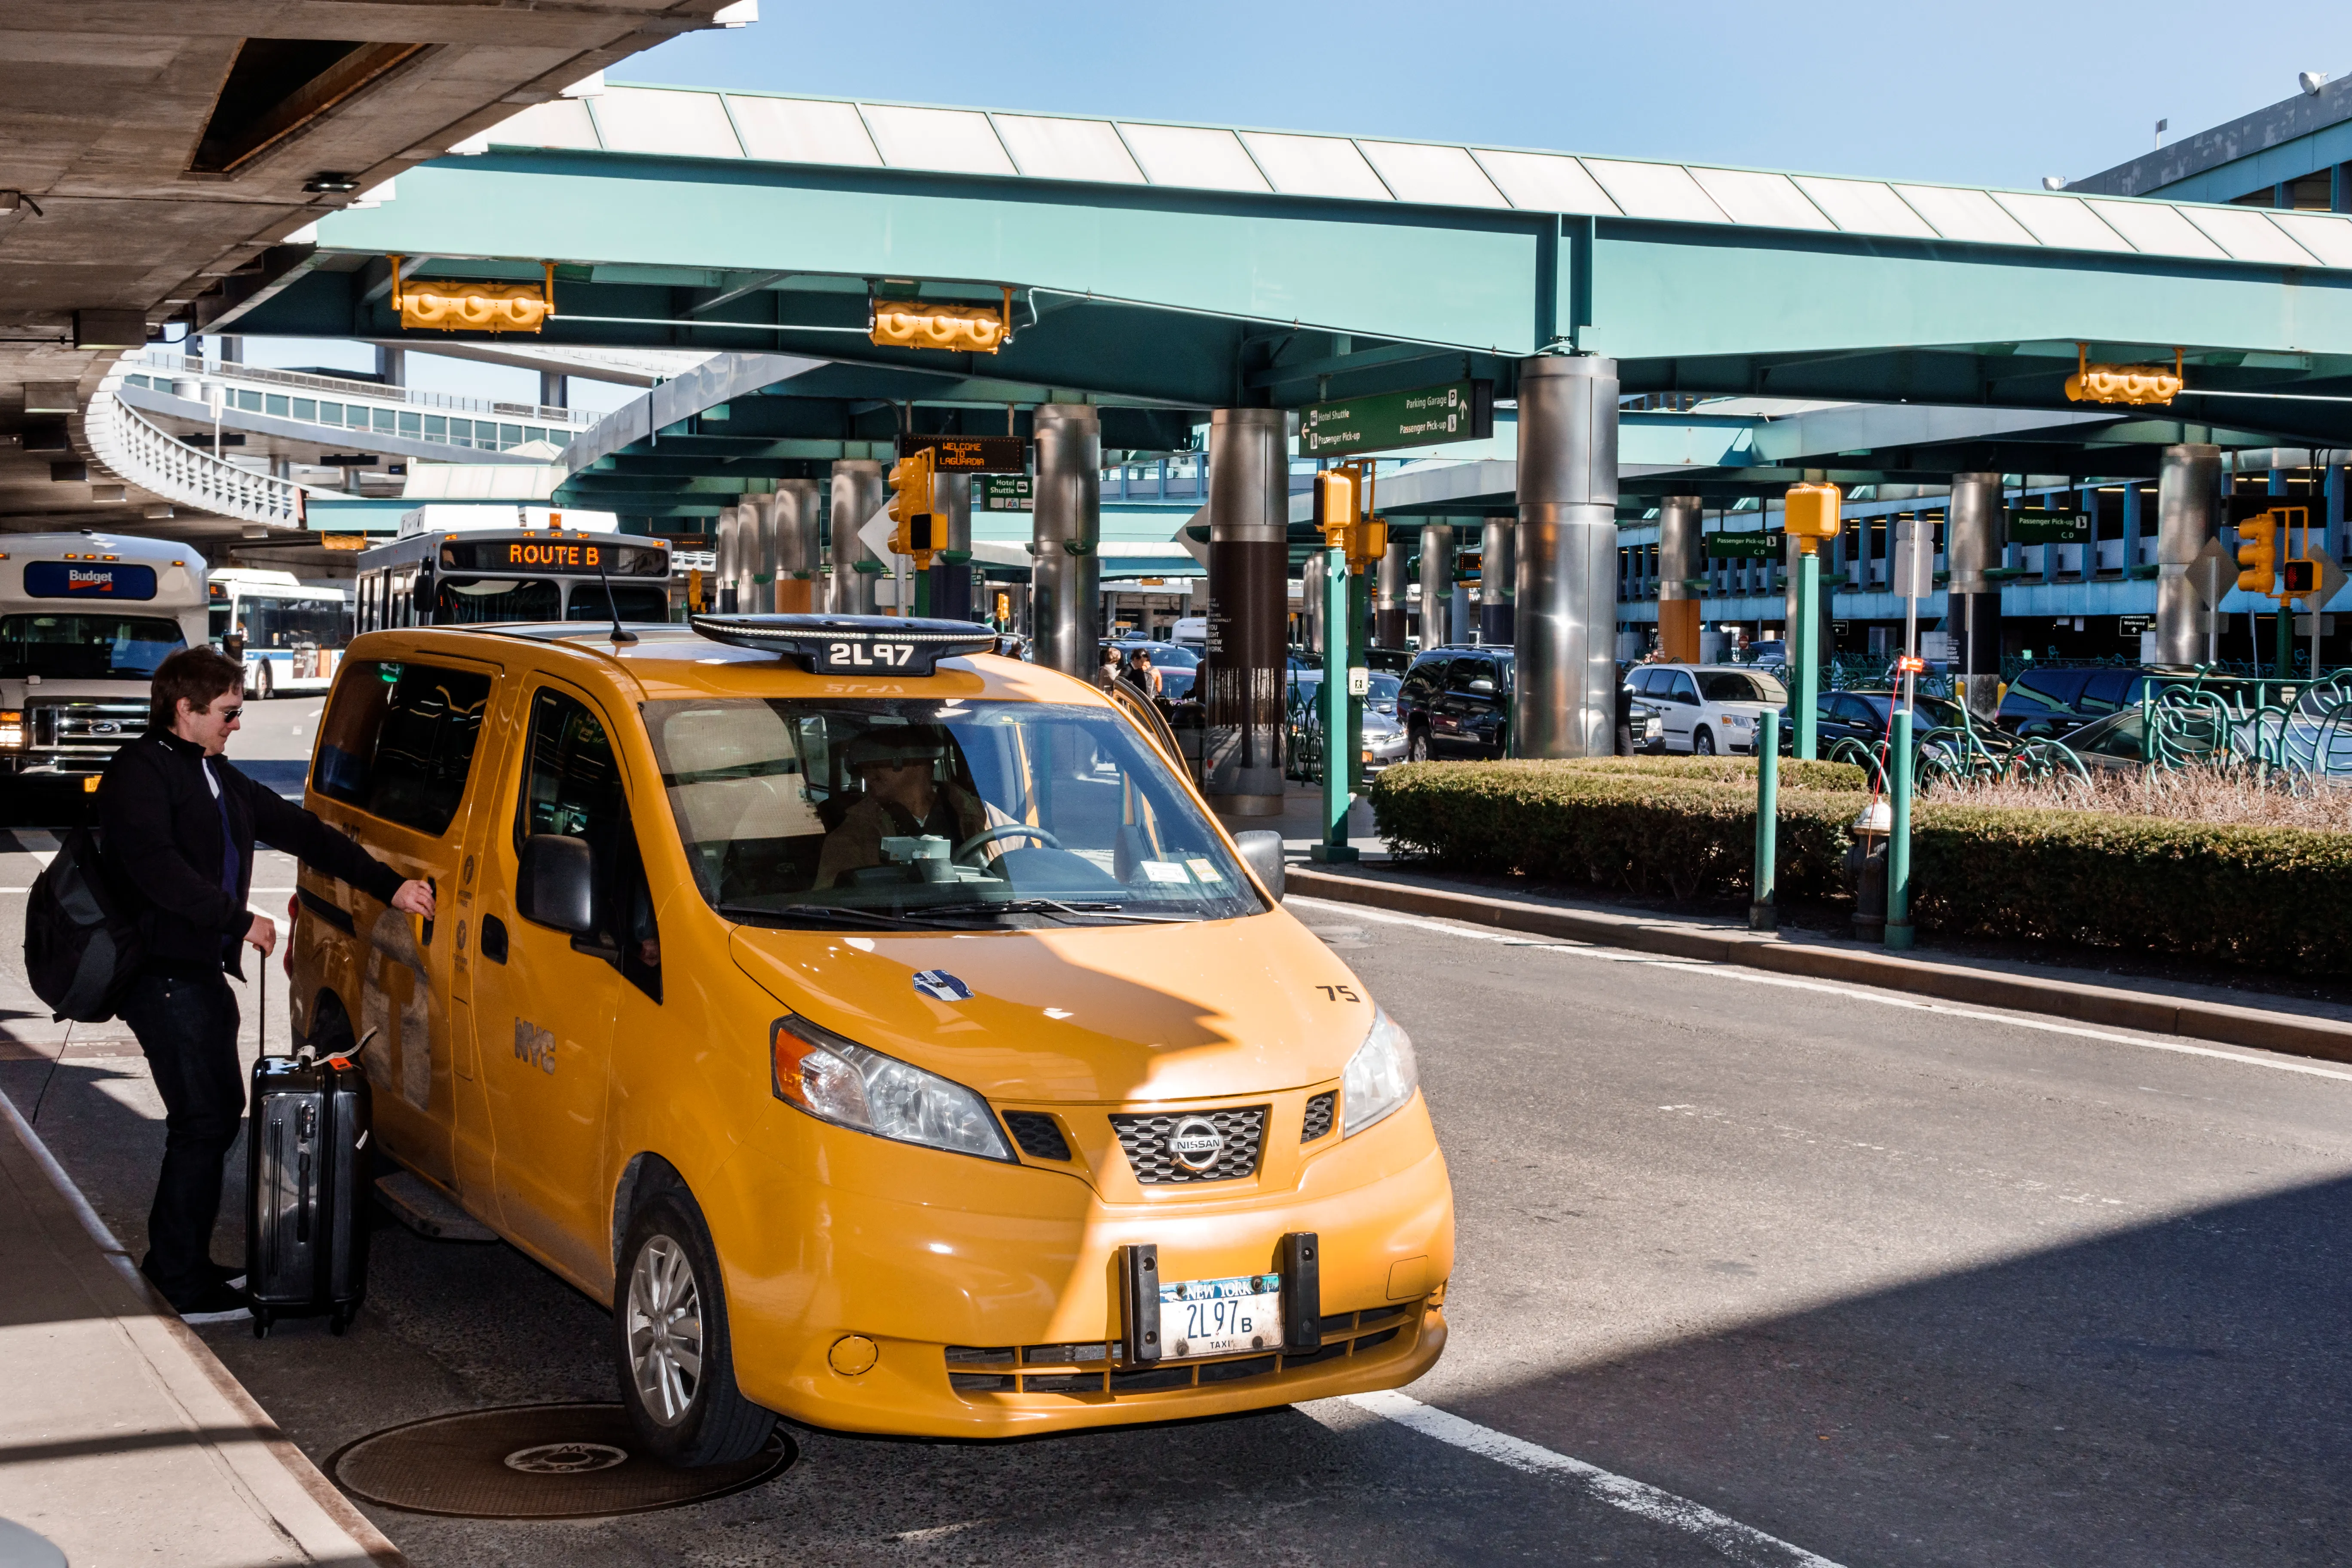 The Only 3 Major Airports Where a Taxi is Cheaper Than an Uber